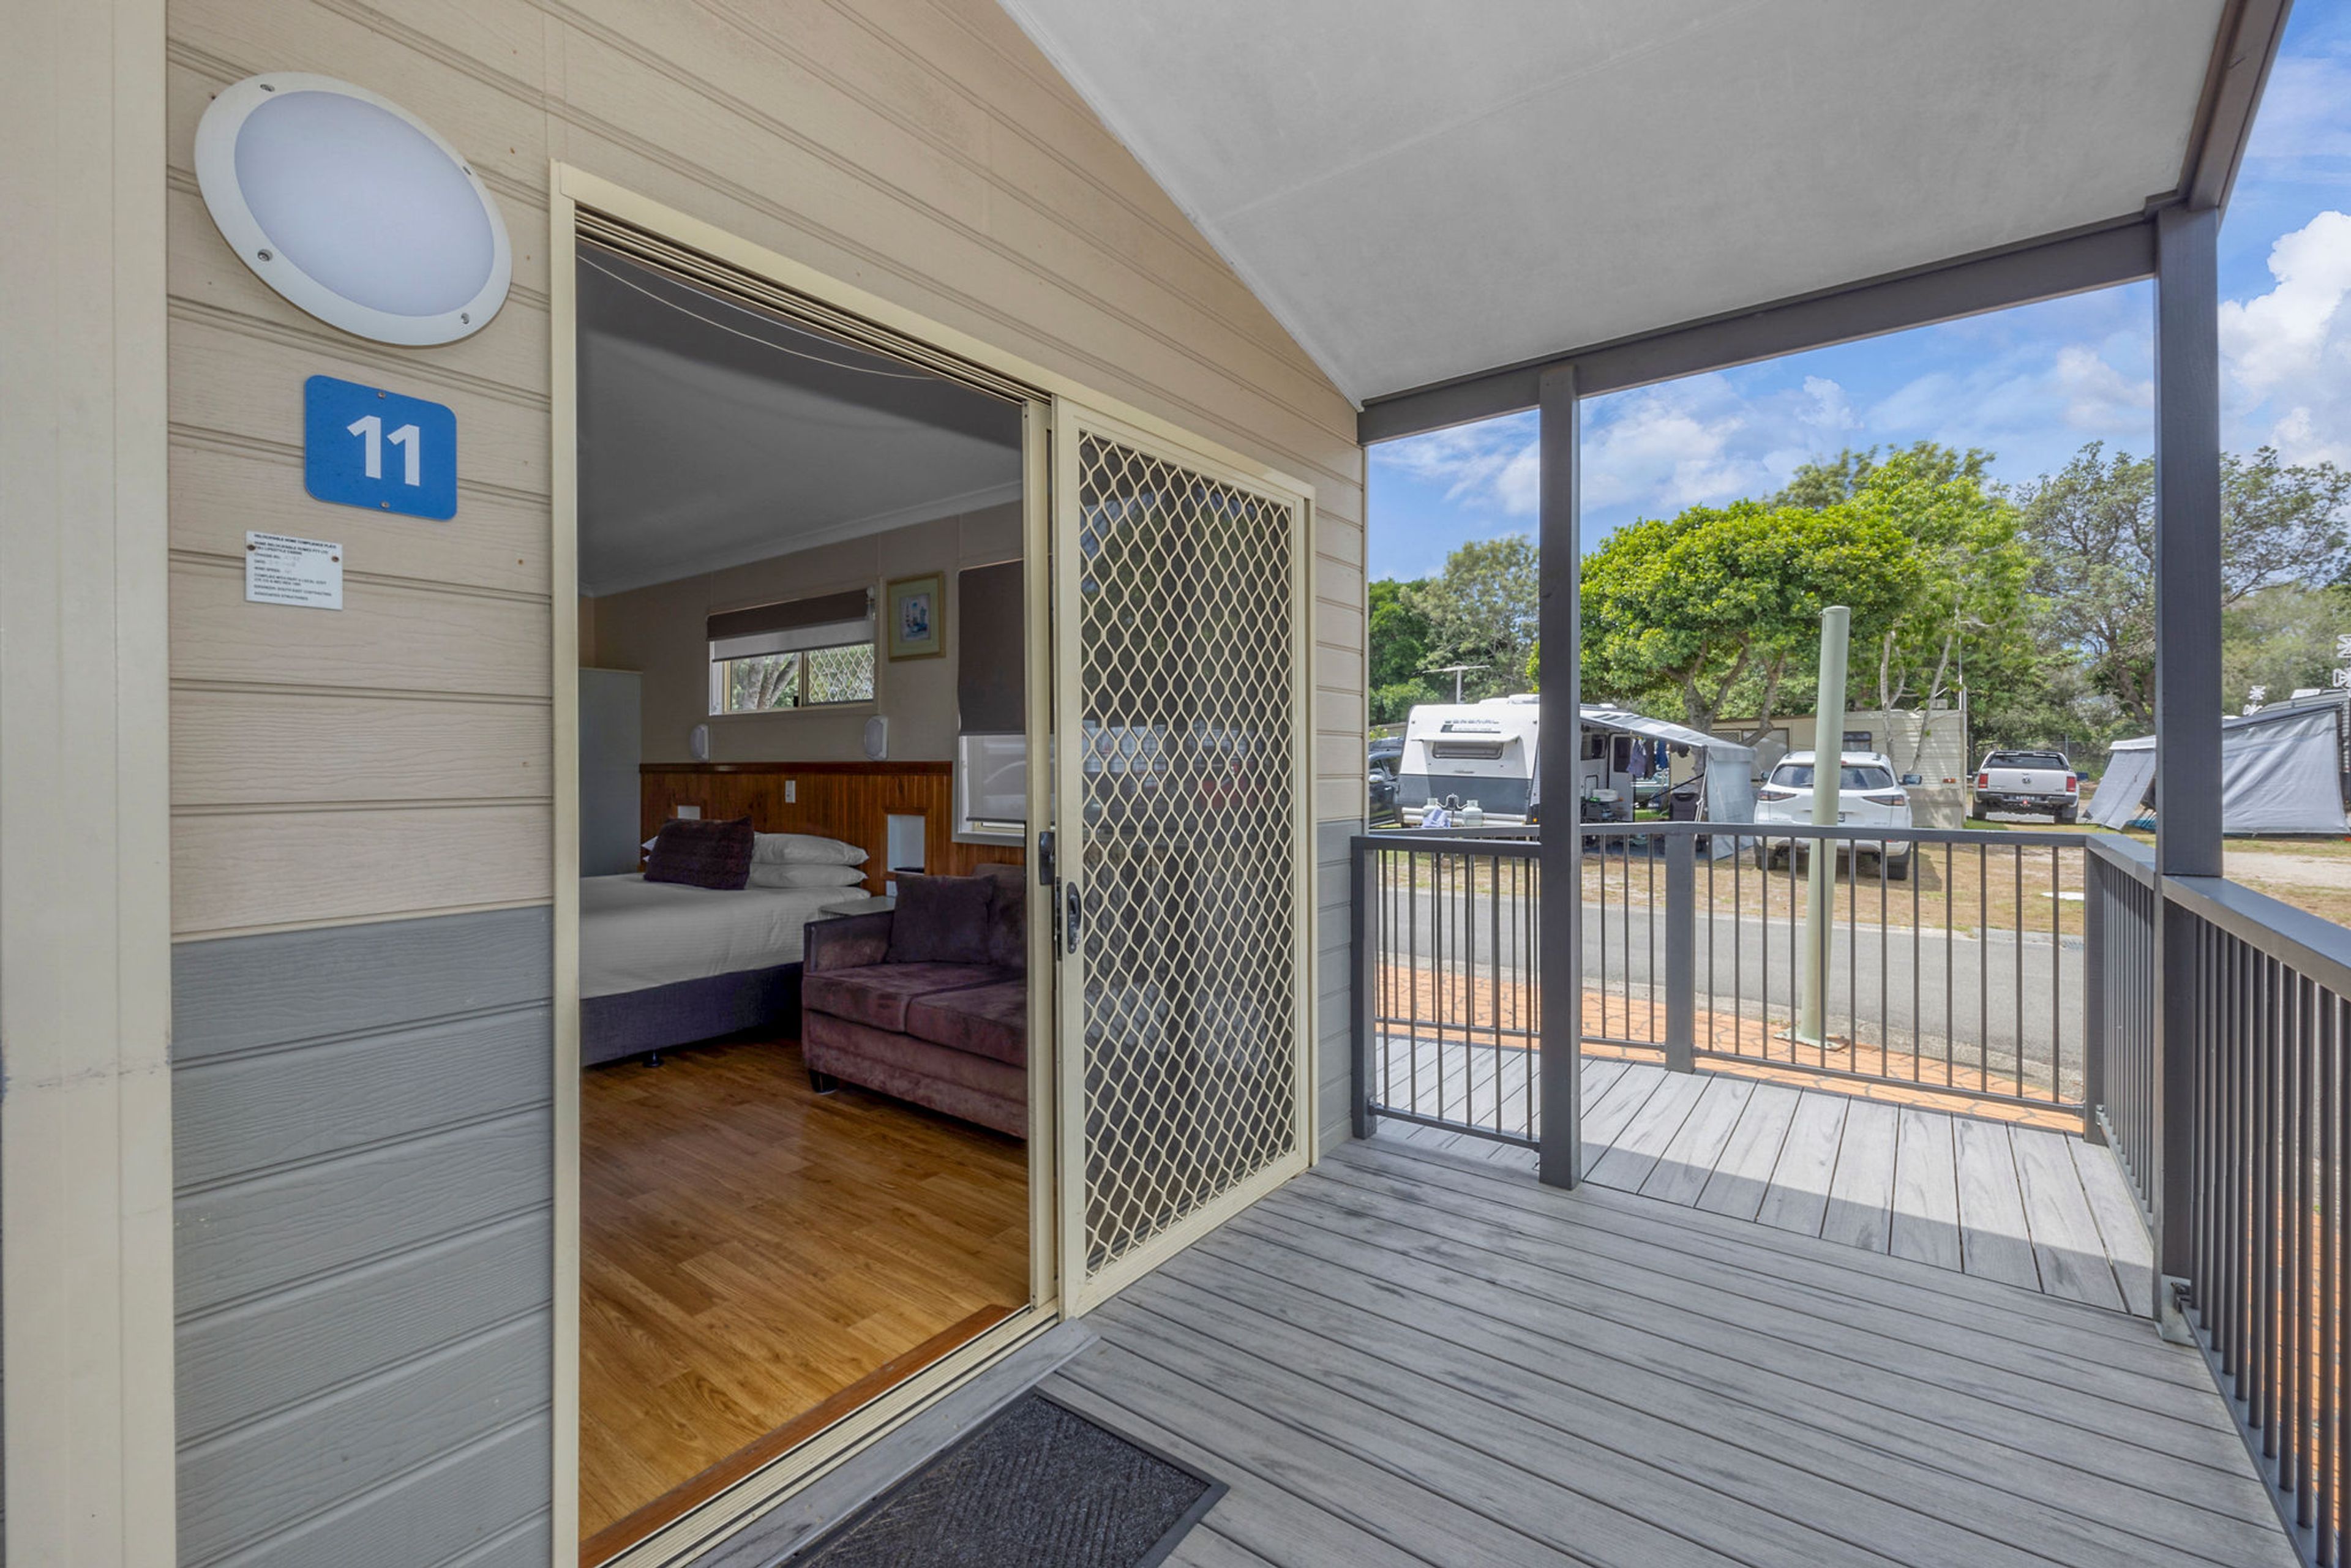 Tuncurry - Deluxe Cabin Accessible - Sleeps 4 - Do